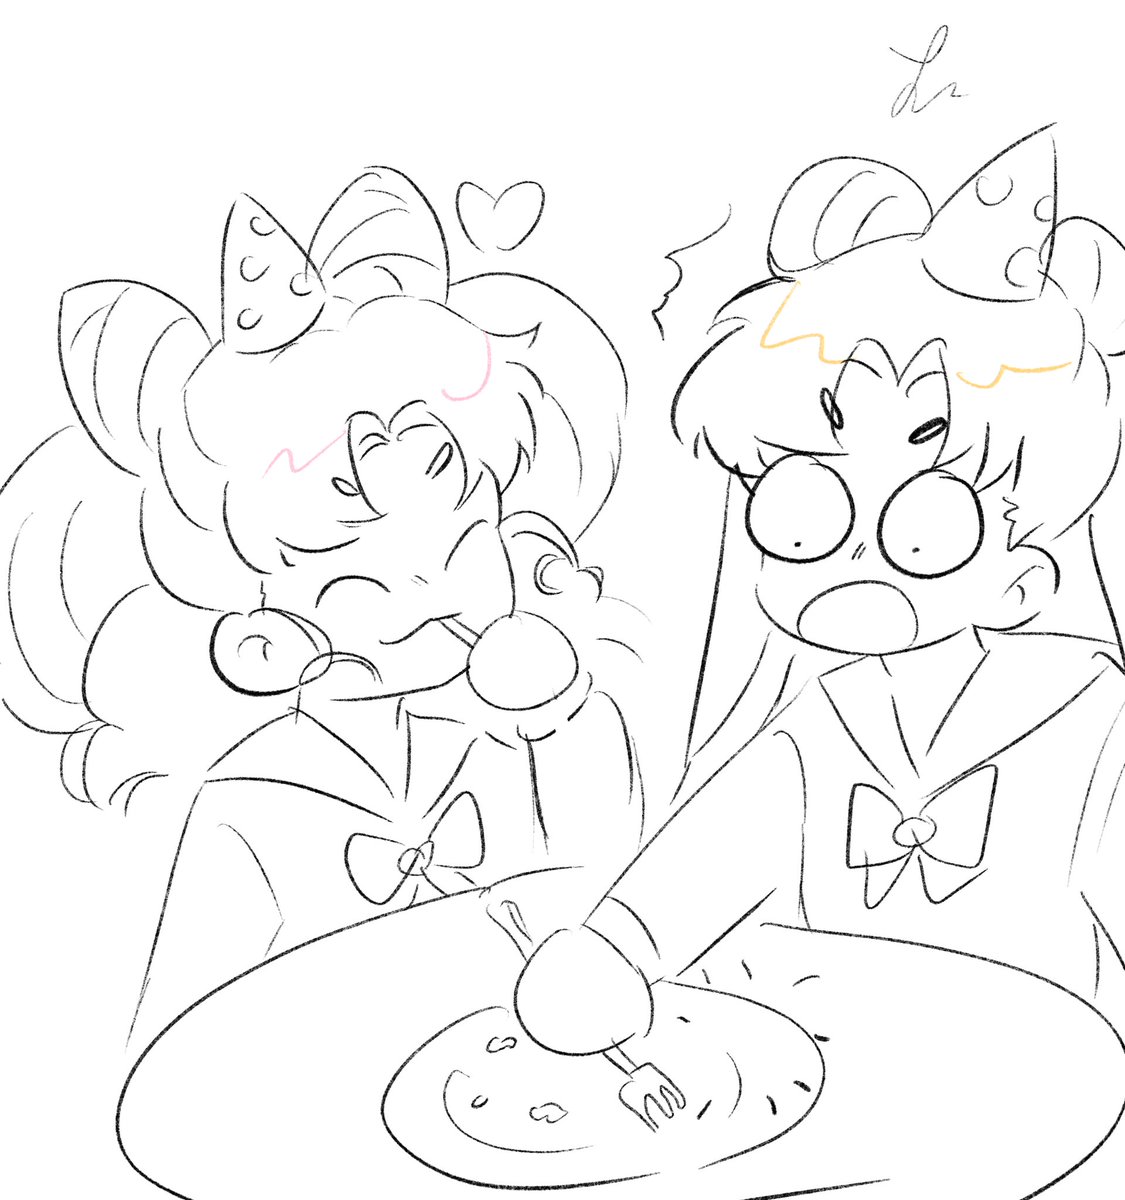 doodles for the birthday girls #sailormoon 